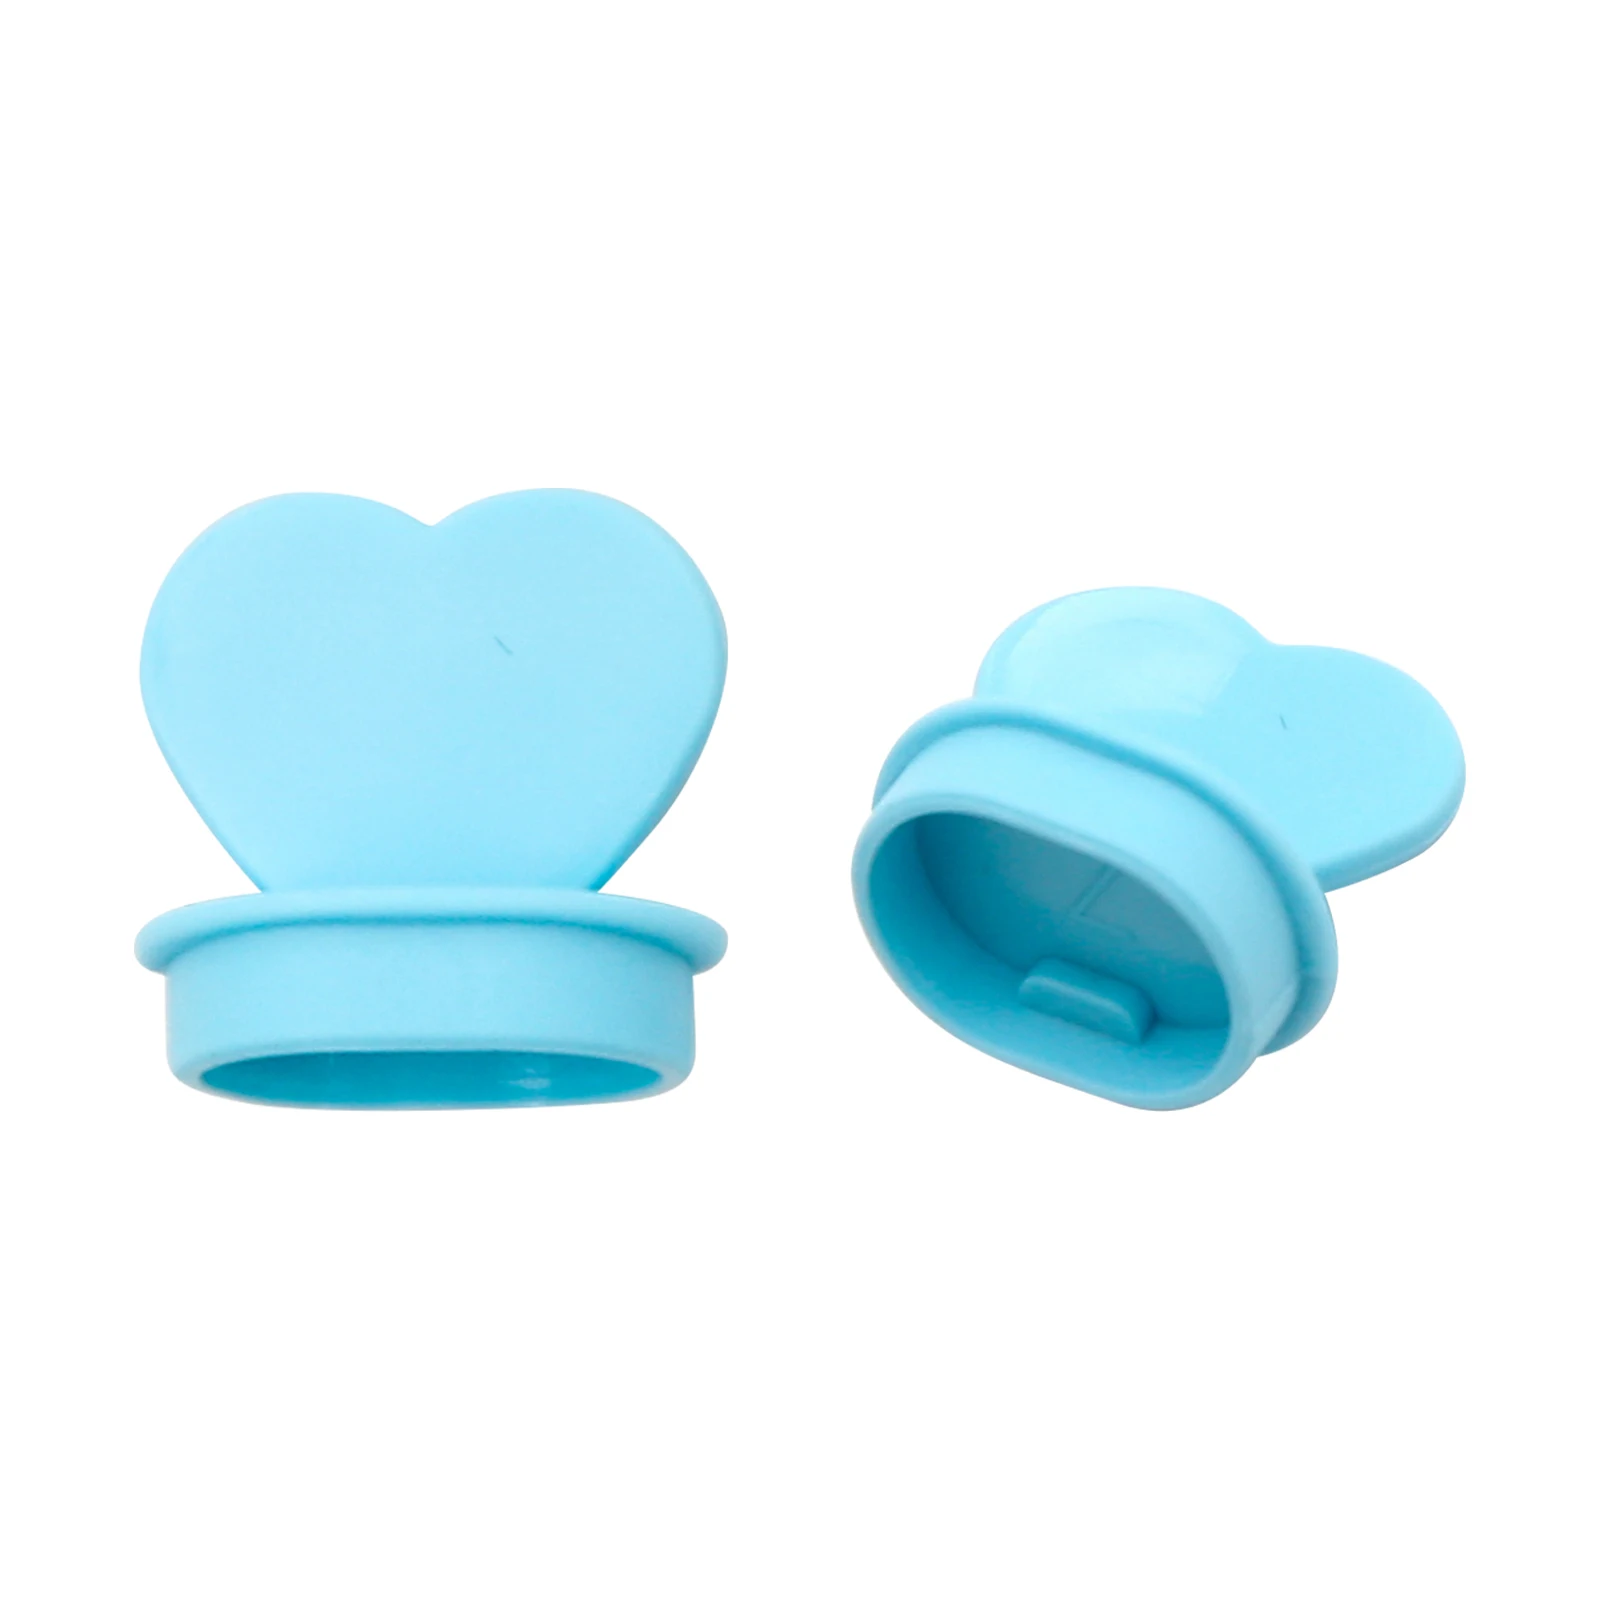 https://ae01.alicdn.com/kf/S468ba015283e40d08226284bd66246e7w/500Pcs-Disposable-Coffee-Cup-Lids-Stoppers-Injection-Caps-Heart-Shaped-Circle-Plug-Takeaway-Packing-Milk-Tea.jpg